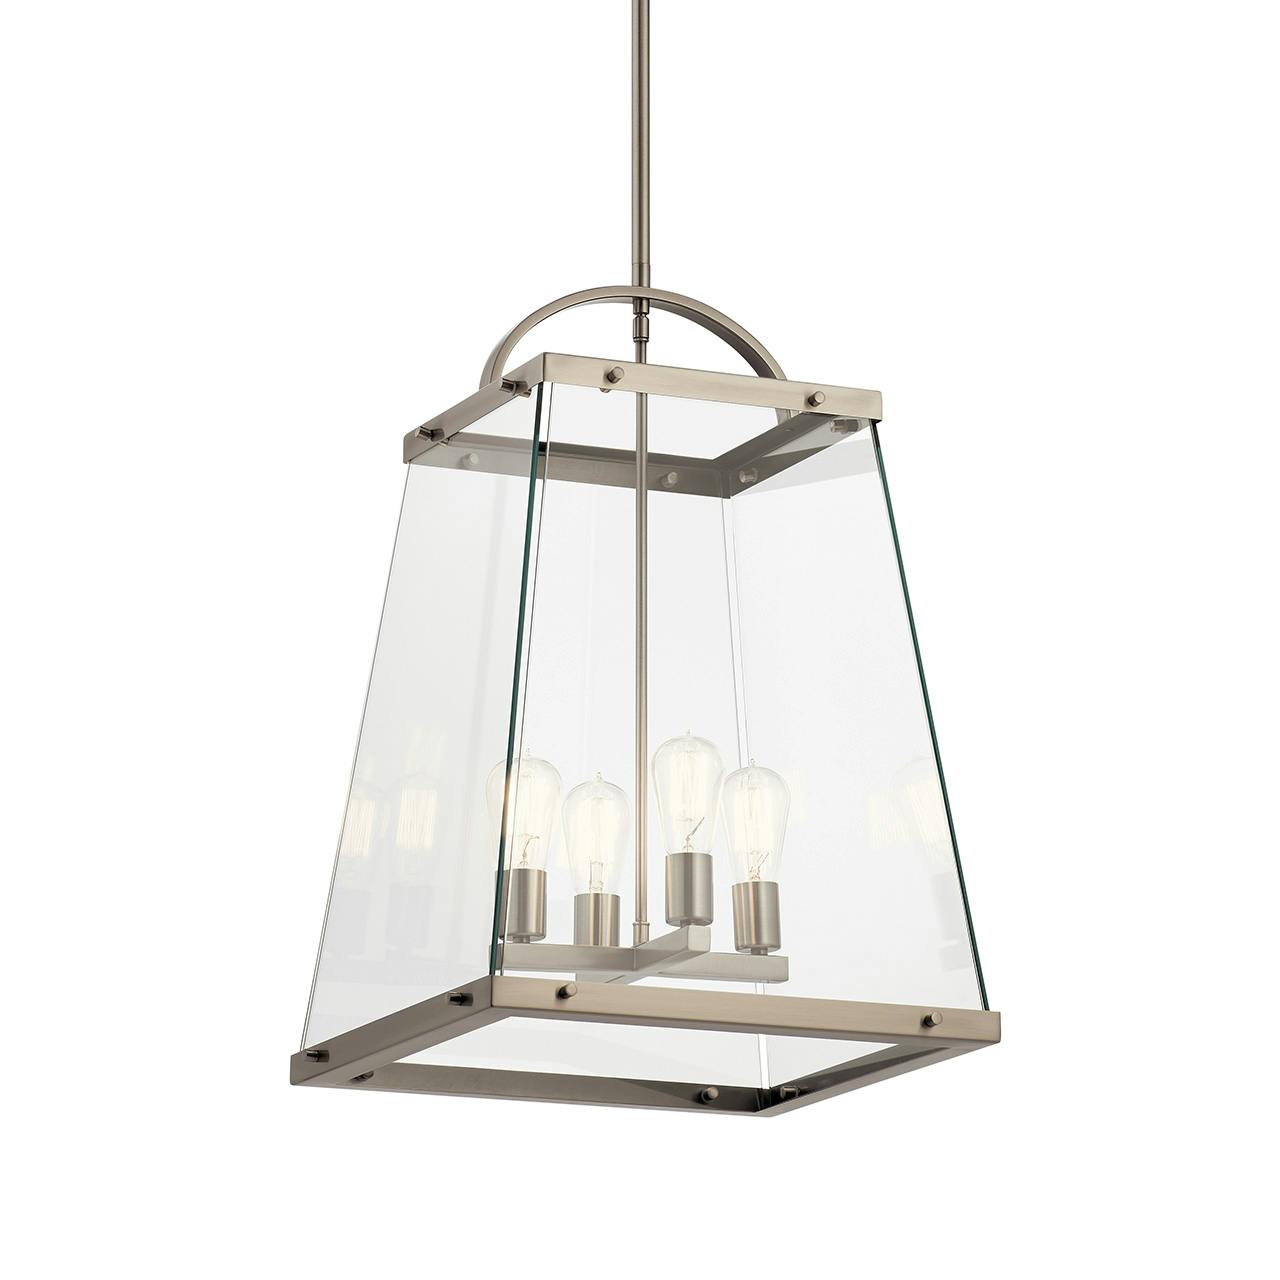 Darton 25.75" 4 Light Pendant Pewter without the canopy on a white background